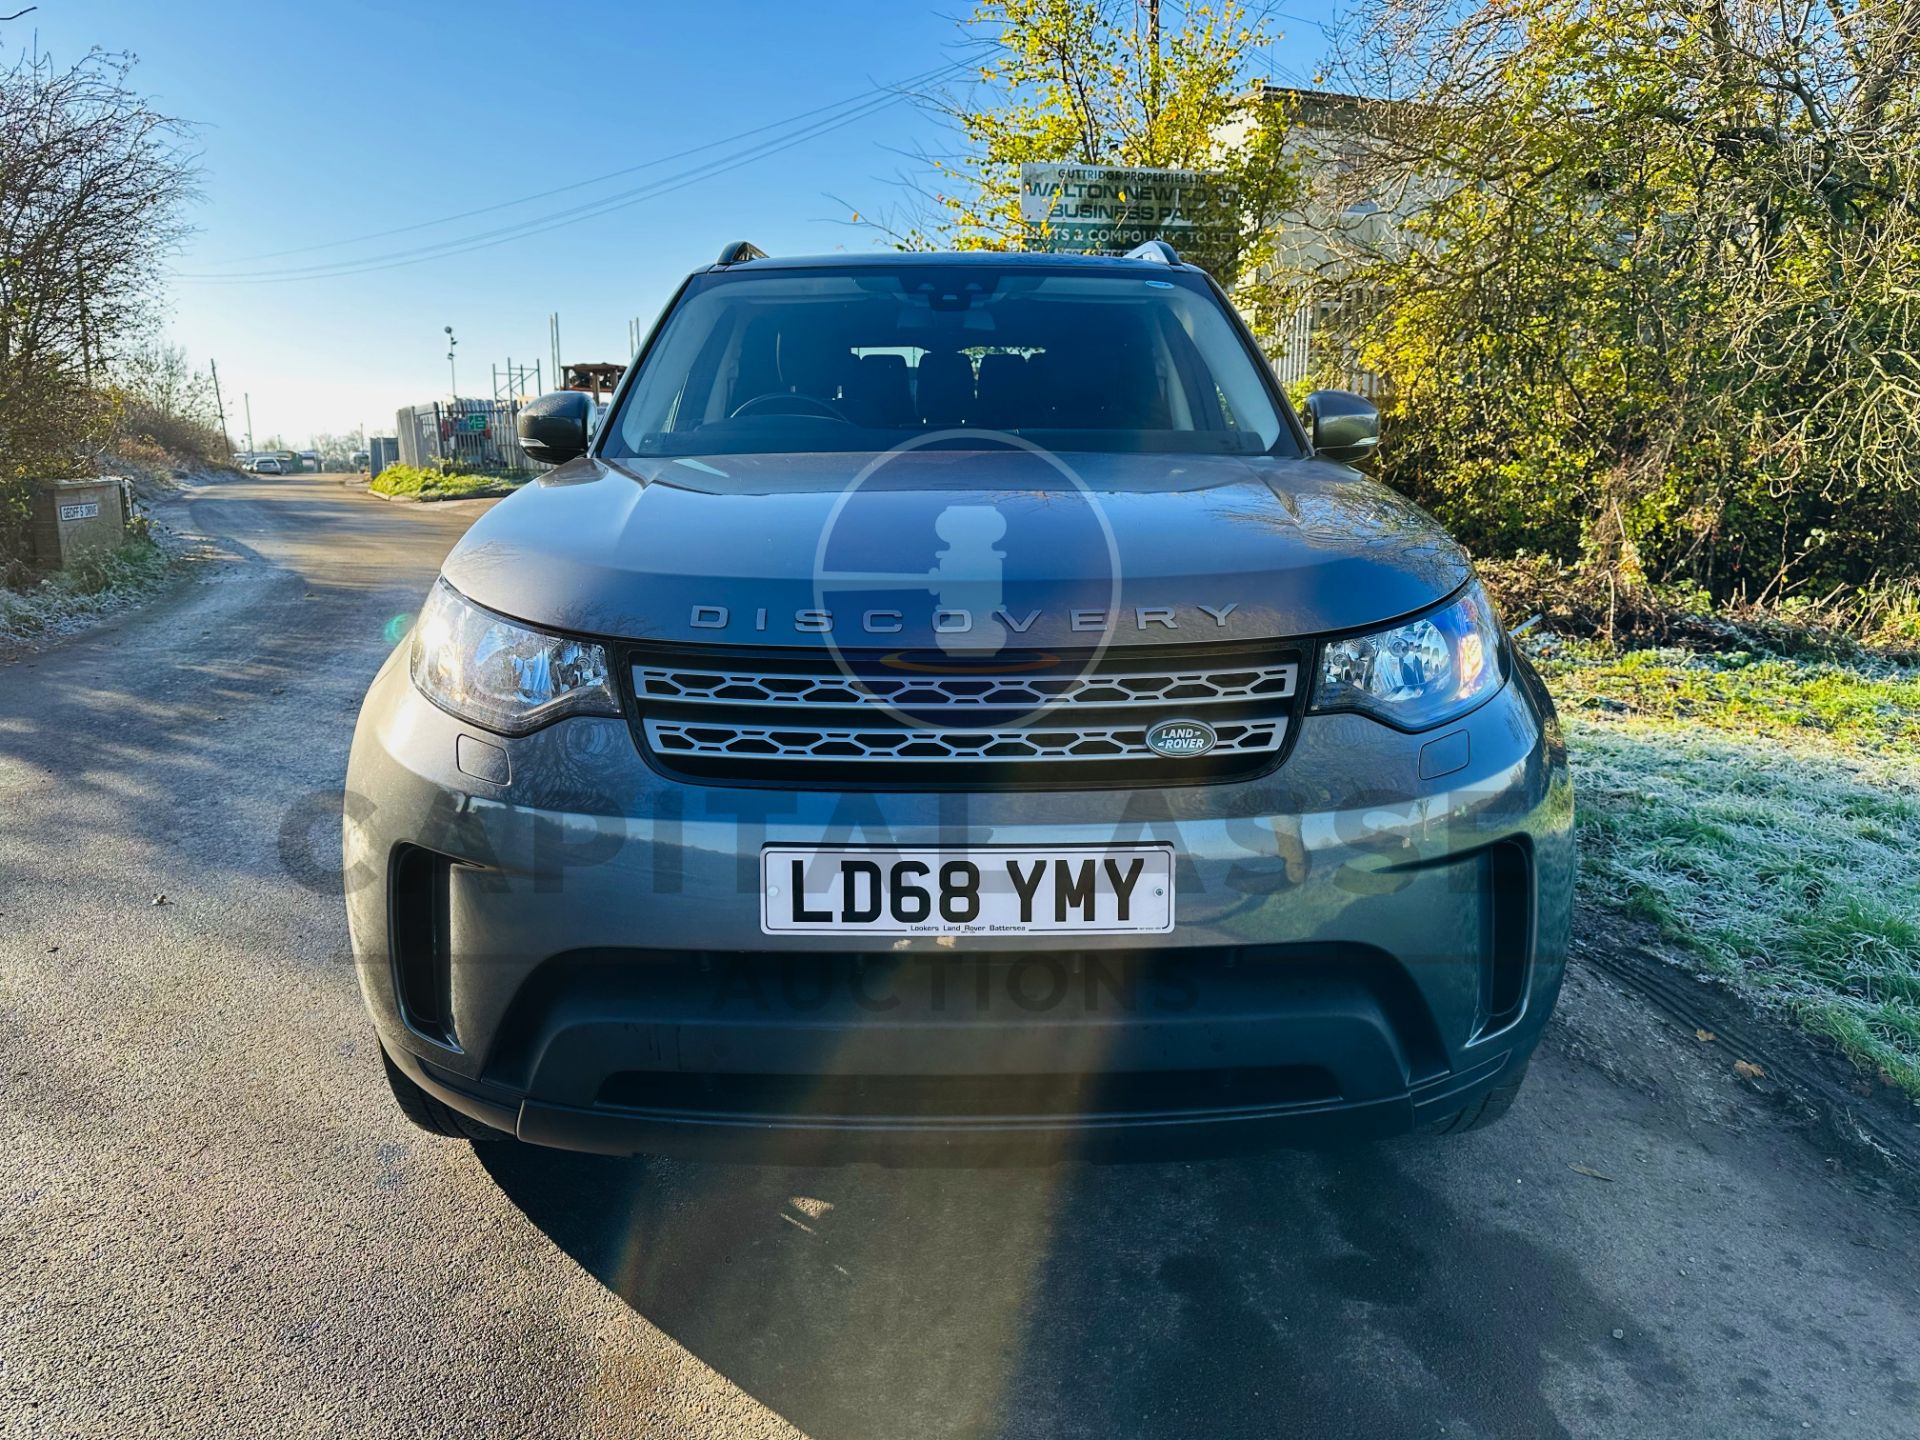 (ON SALE) LAND ROVER DISCOVERY 5 "AUTO DIESEL - 7 SEATER SUV - 2019 MODEL - ONLY 22K MILES FROM NEW - Image 3 of 41